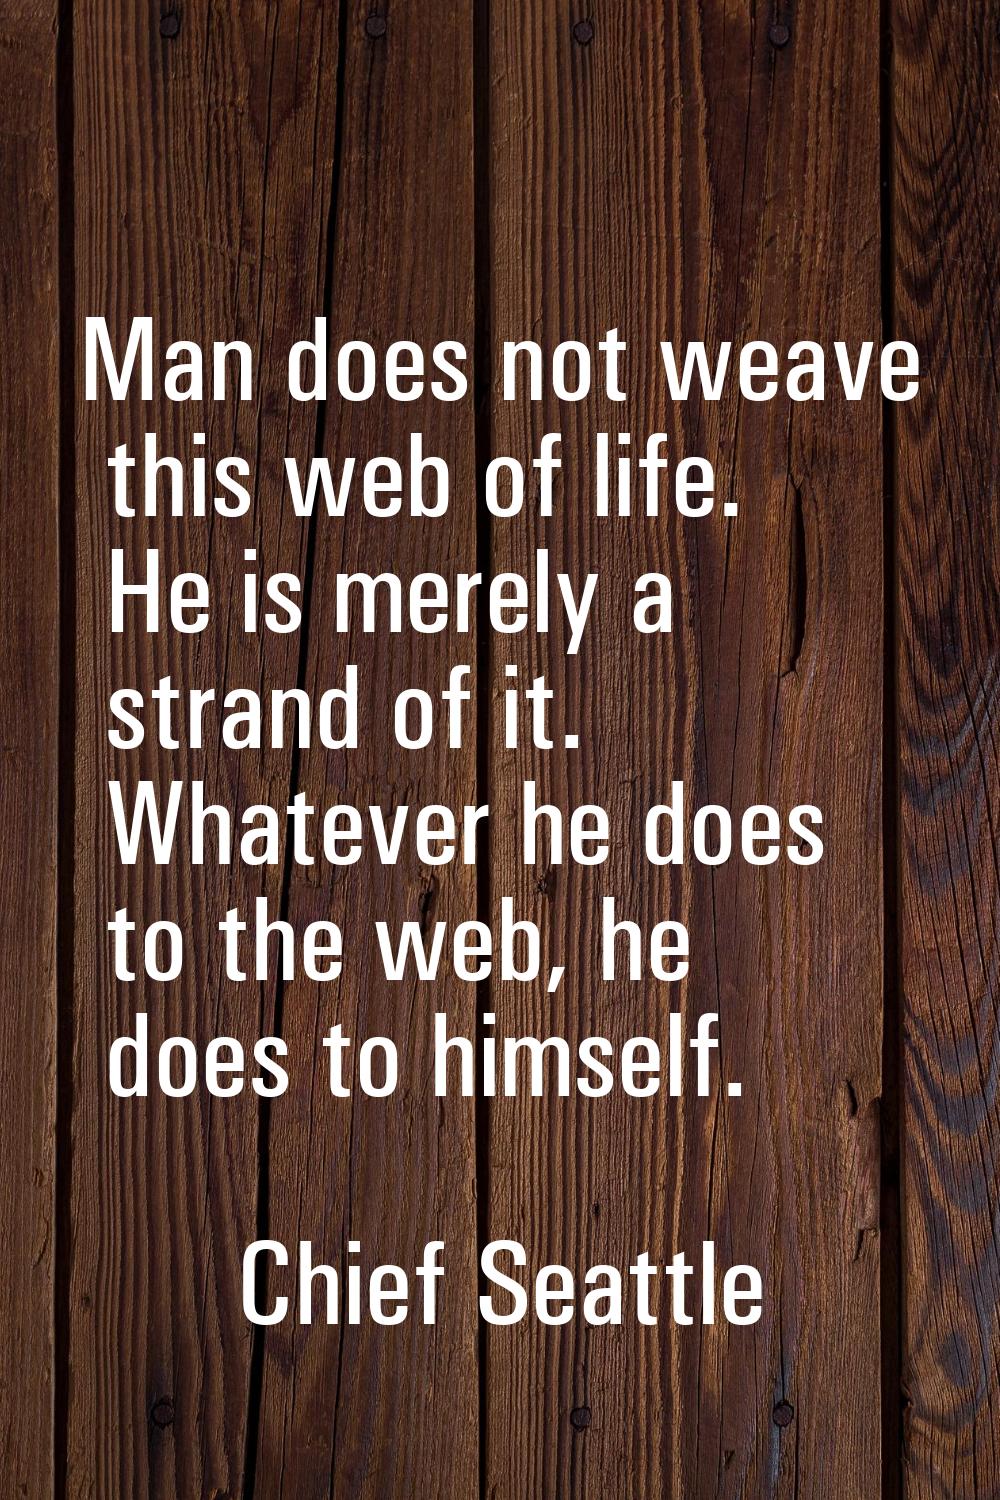 Man does not weave this web of life. He is merely a strand of it. Whatever he does to the web, he d